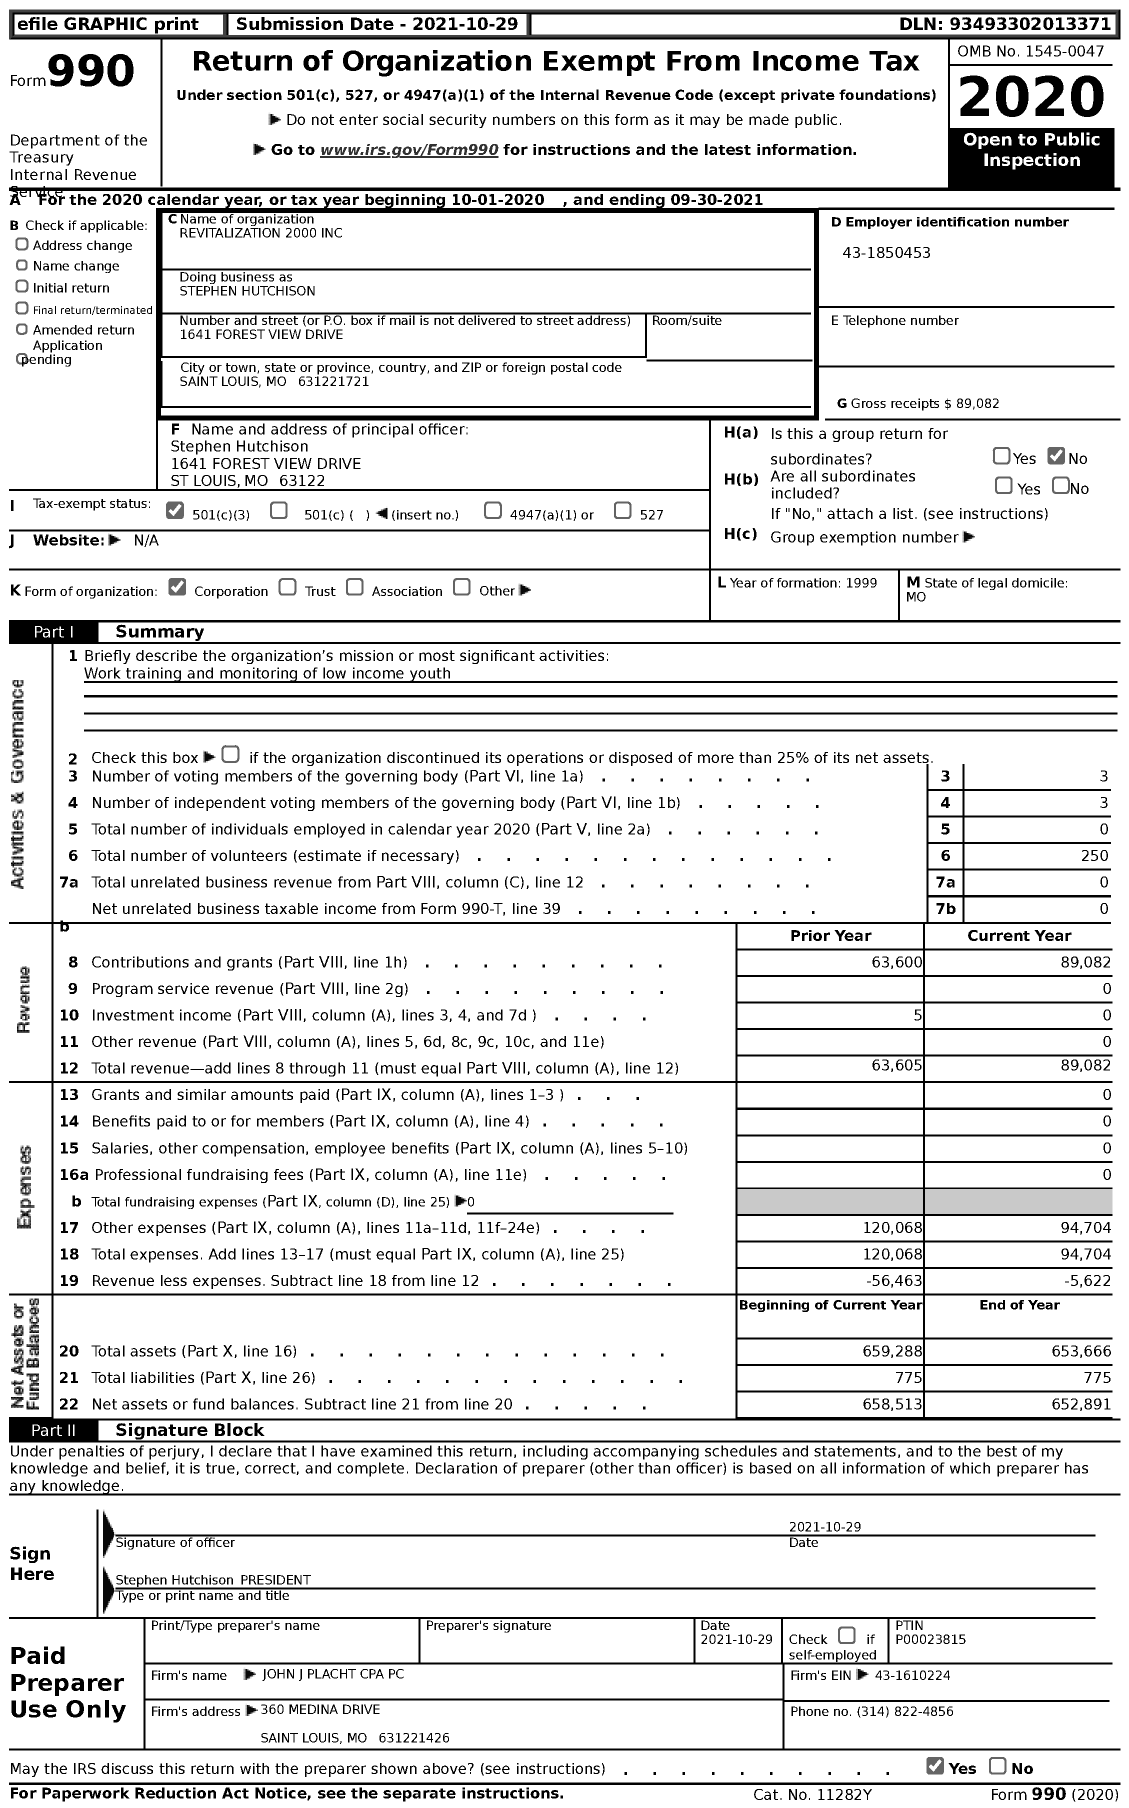 Image of first page of 2020 Form 990 for Revitalization 2000